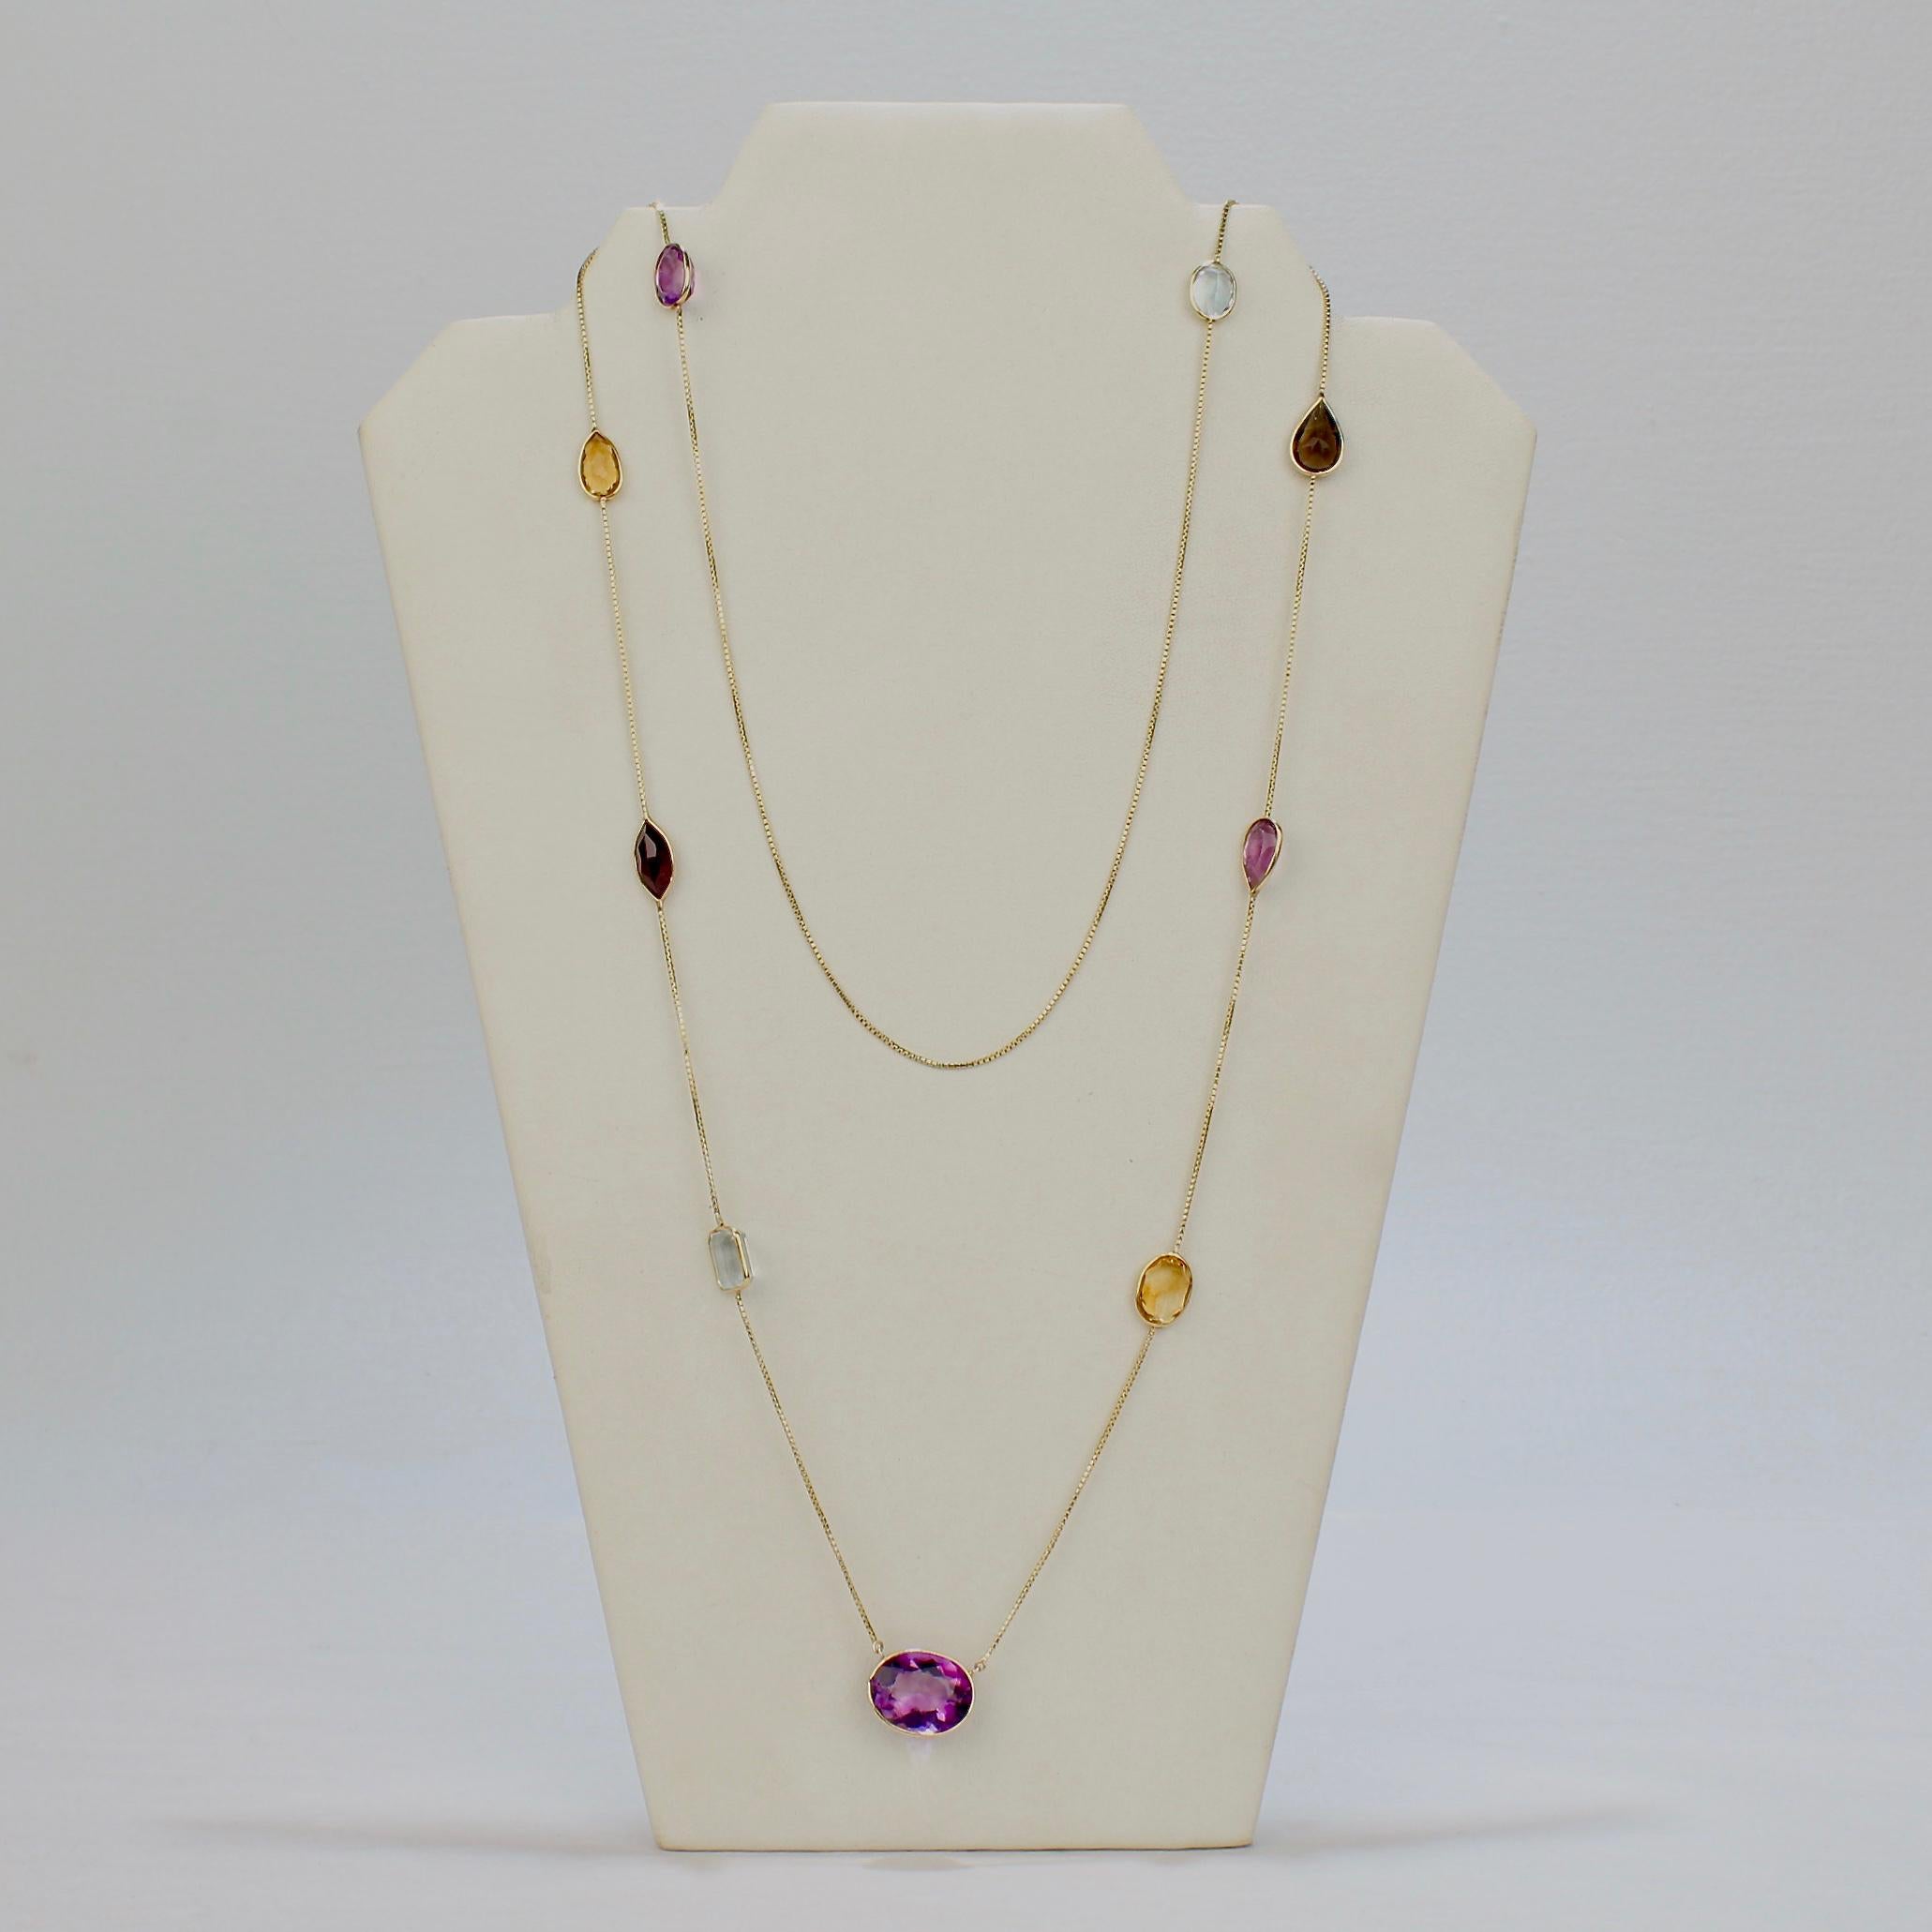 A fine Mid-century rope-length gold and gemstone necklace.

With a box chain in 14k yellow gold supporting bezel-set, pear and oval cut amethyst, topaz, and citrine gemstones. 

A great necklace that can be worn at full rope length or elegantly